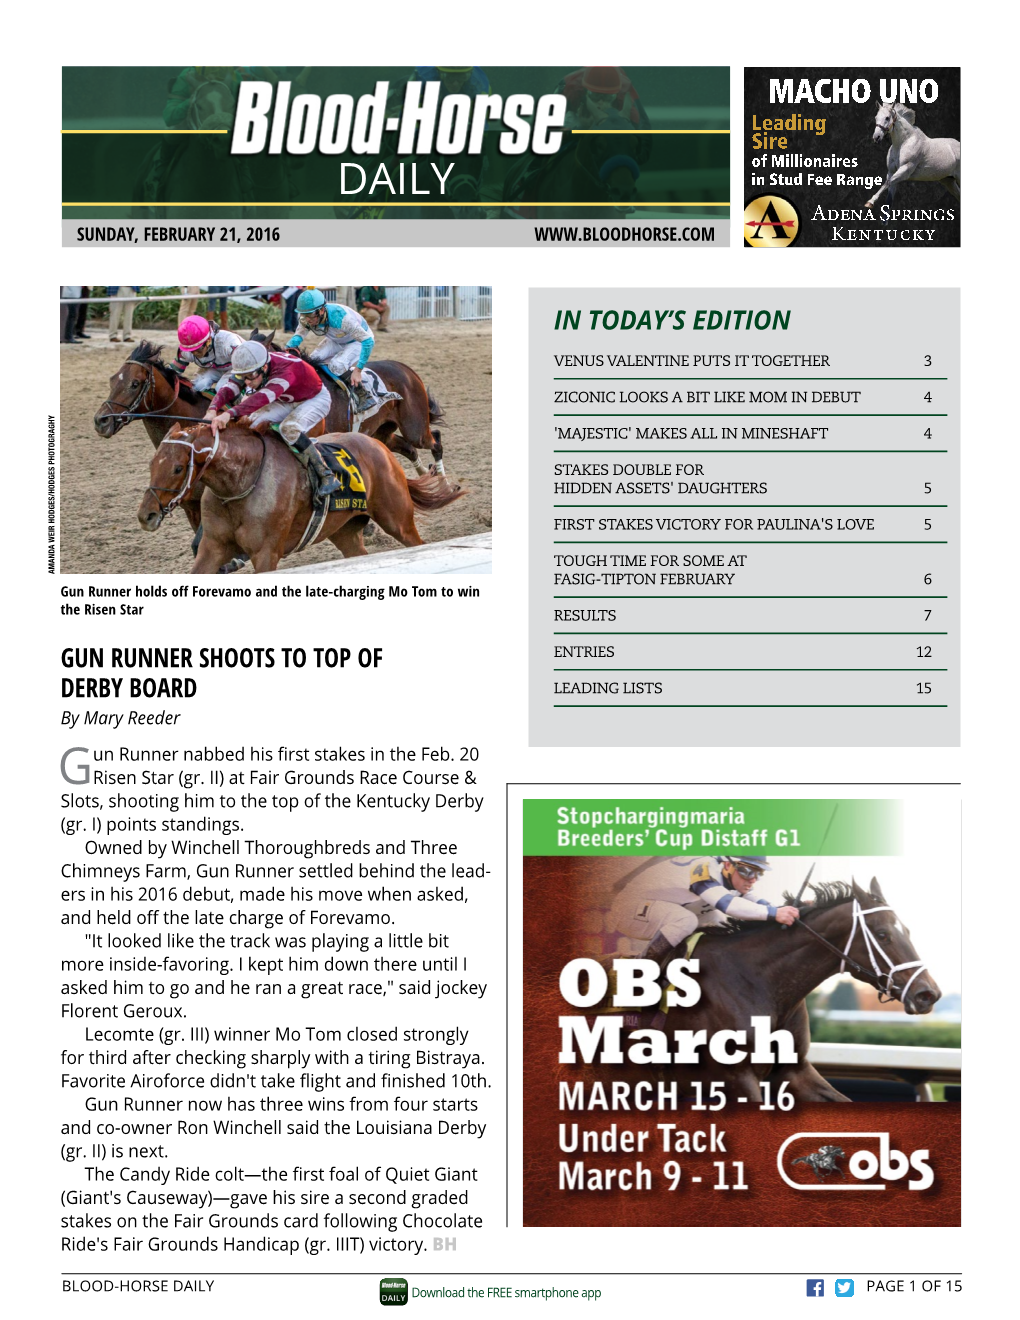 Gun Runner Shoots to Top of Derby Board in Today's